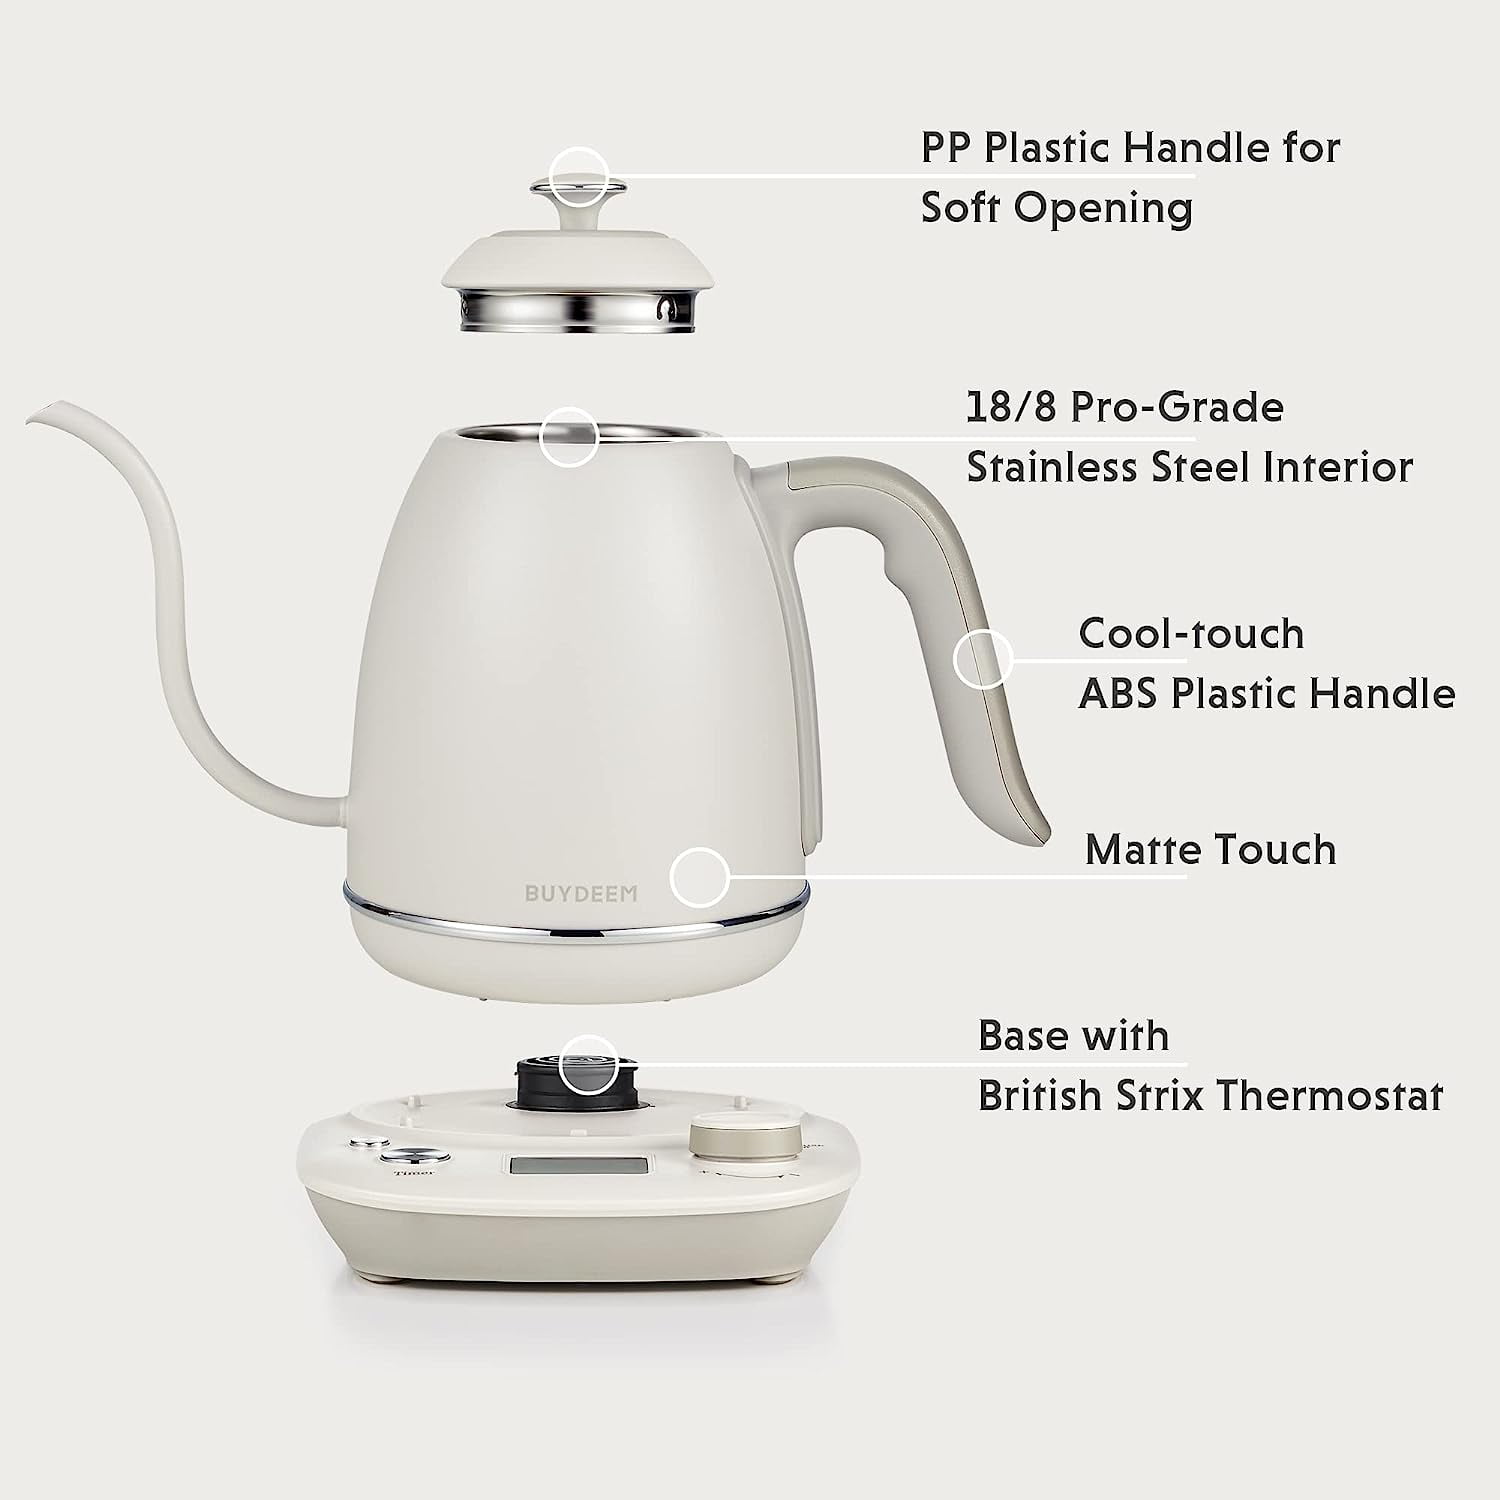 TUMIDY Electric Gooseneck Kettle Temperature Control 1L 8 Variable Presets  Pour over Coffee Kettle, 1500W Rapid Heating, Stainless Steel Inner, Auto